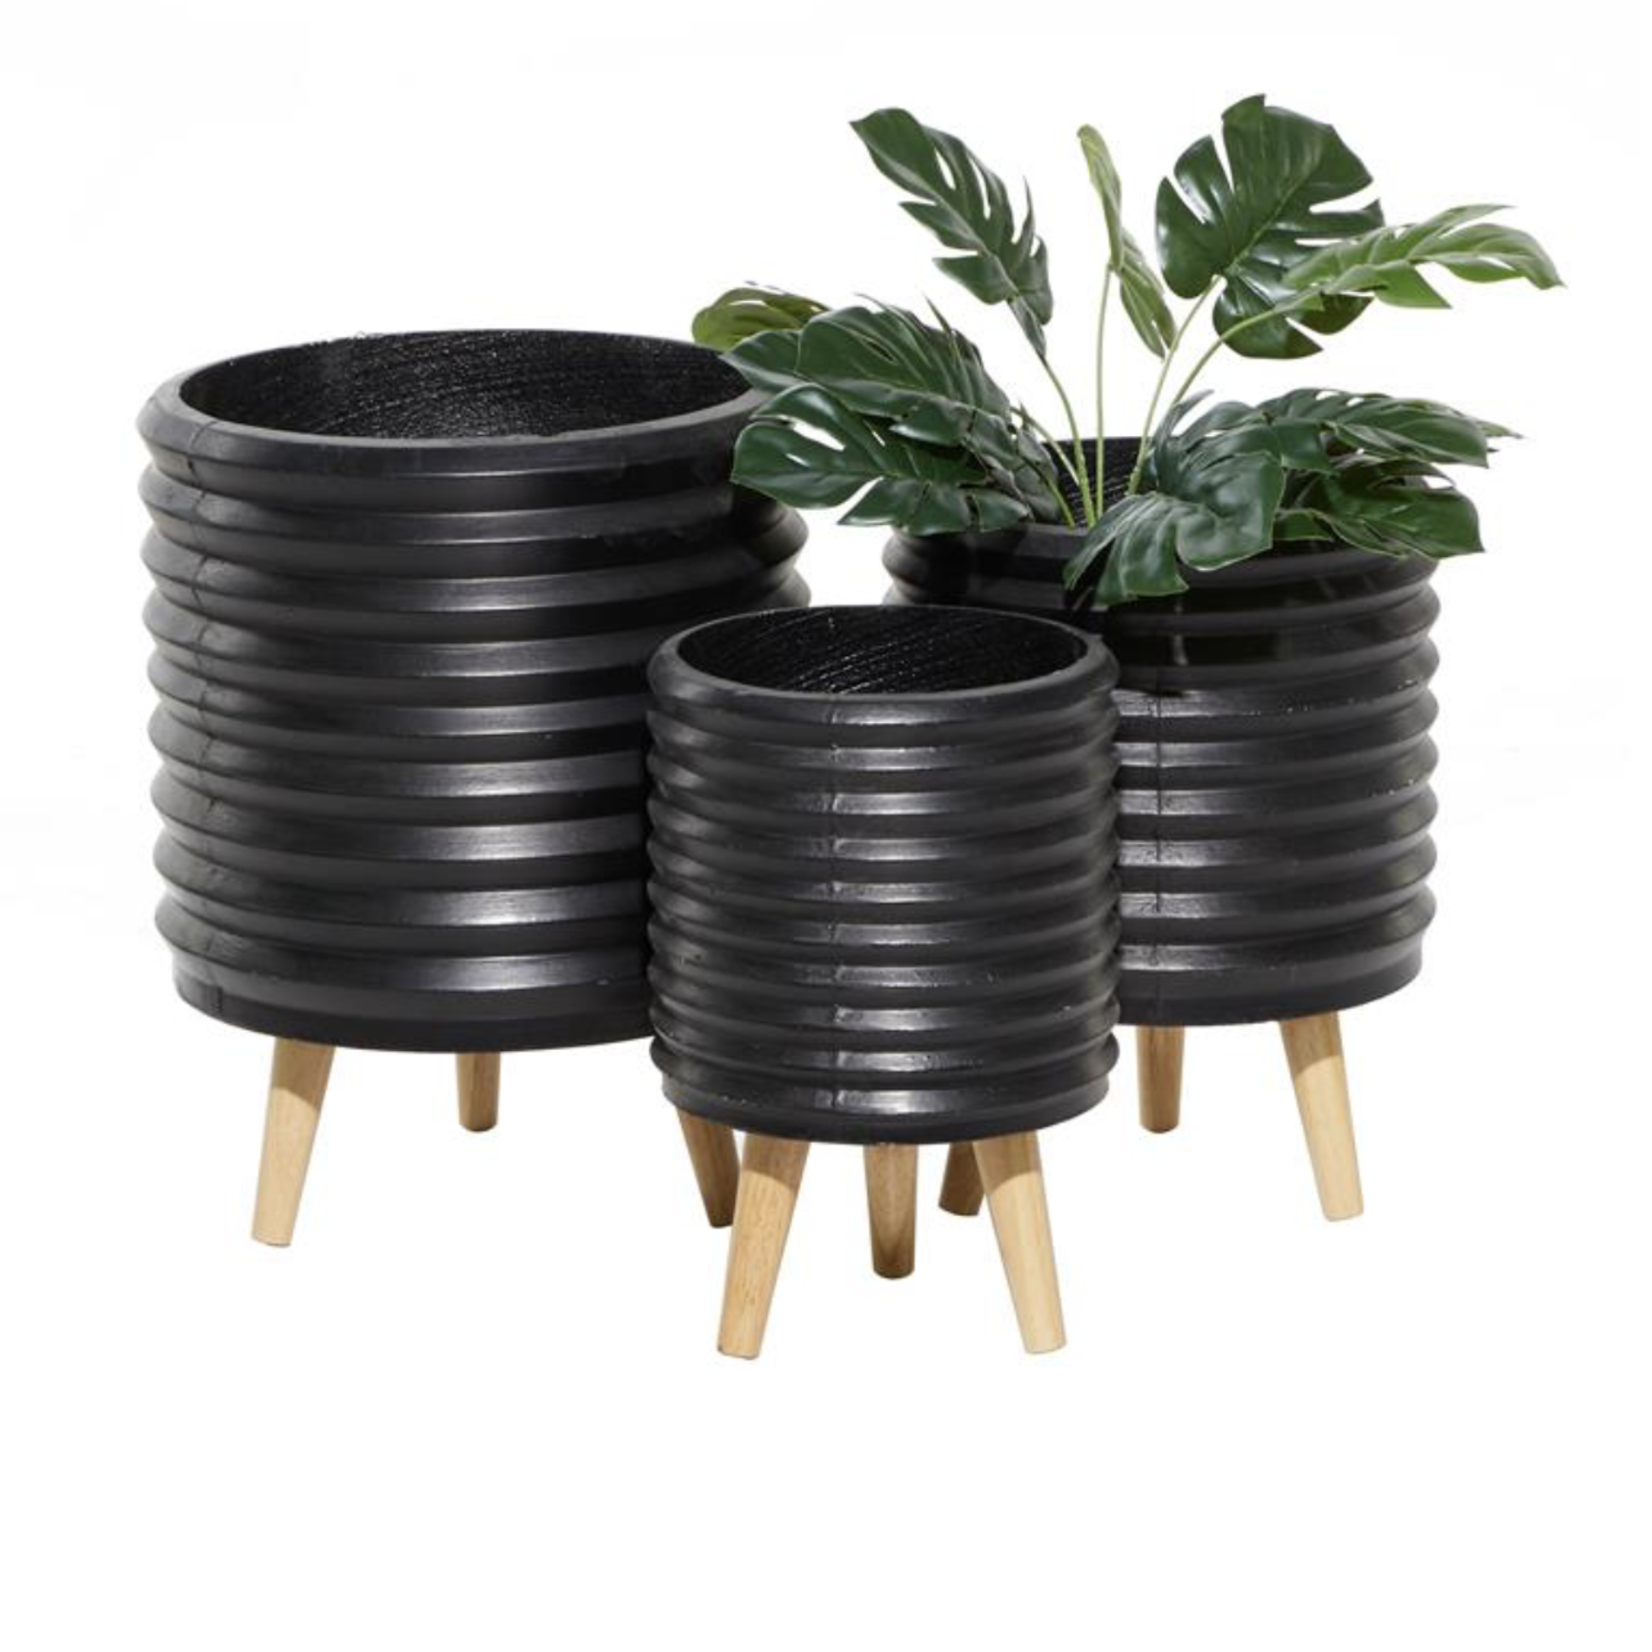 14”H X 10” SMALL BLACK MAGNESIUM OXIDE INDOOR OUTDOOR PLANTER WITH WOOD LEGS (NOT WATER TIGHT)